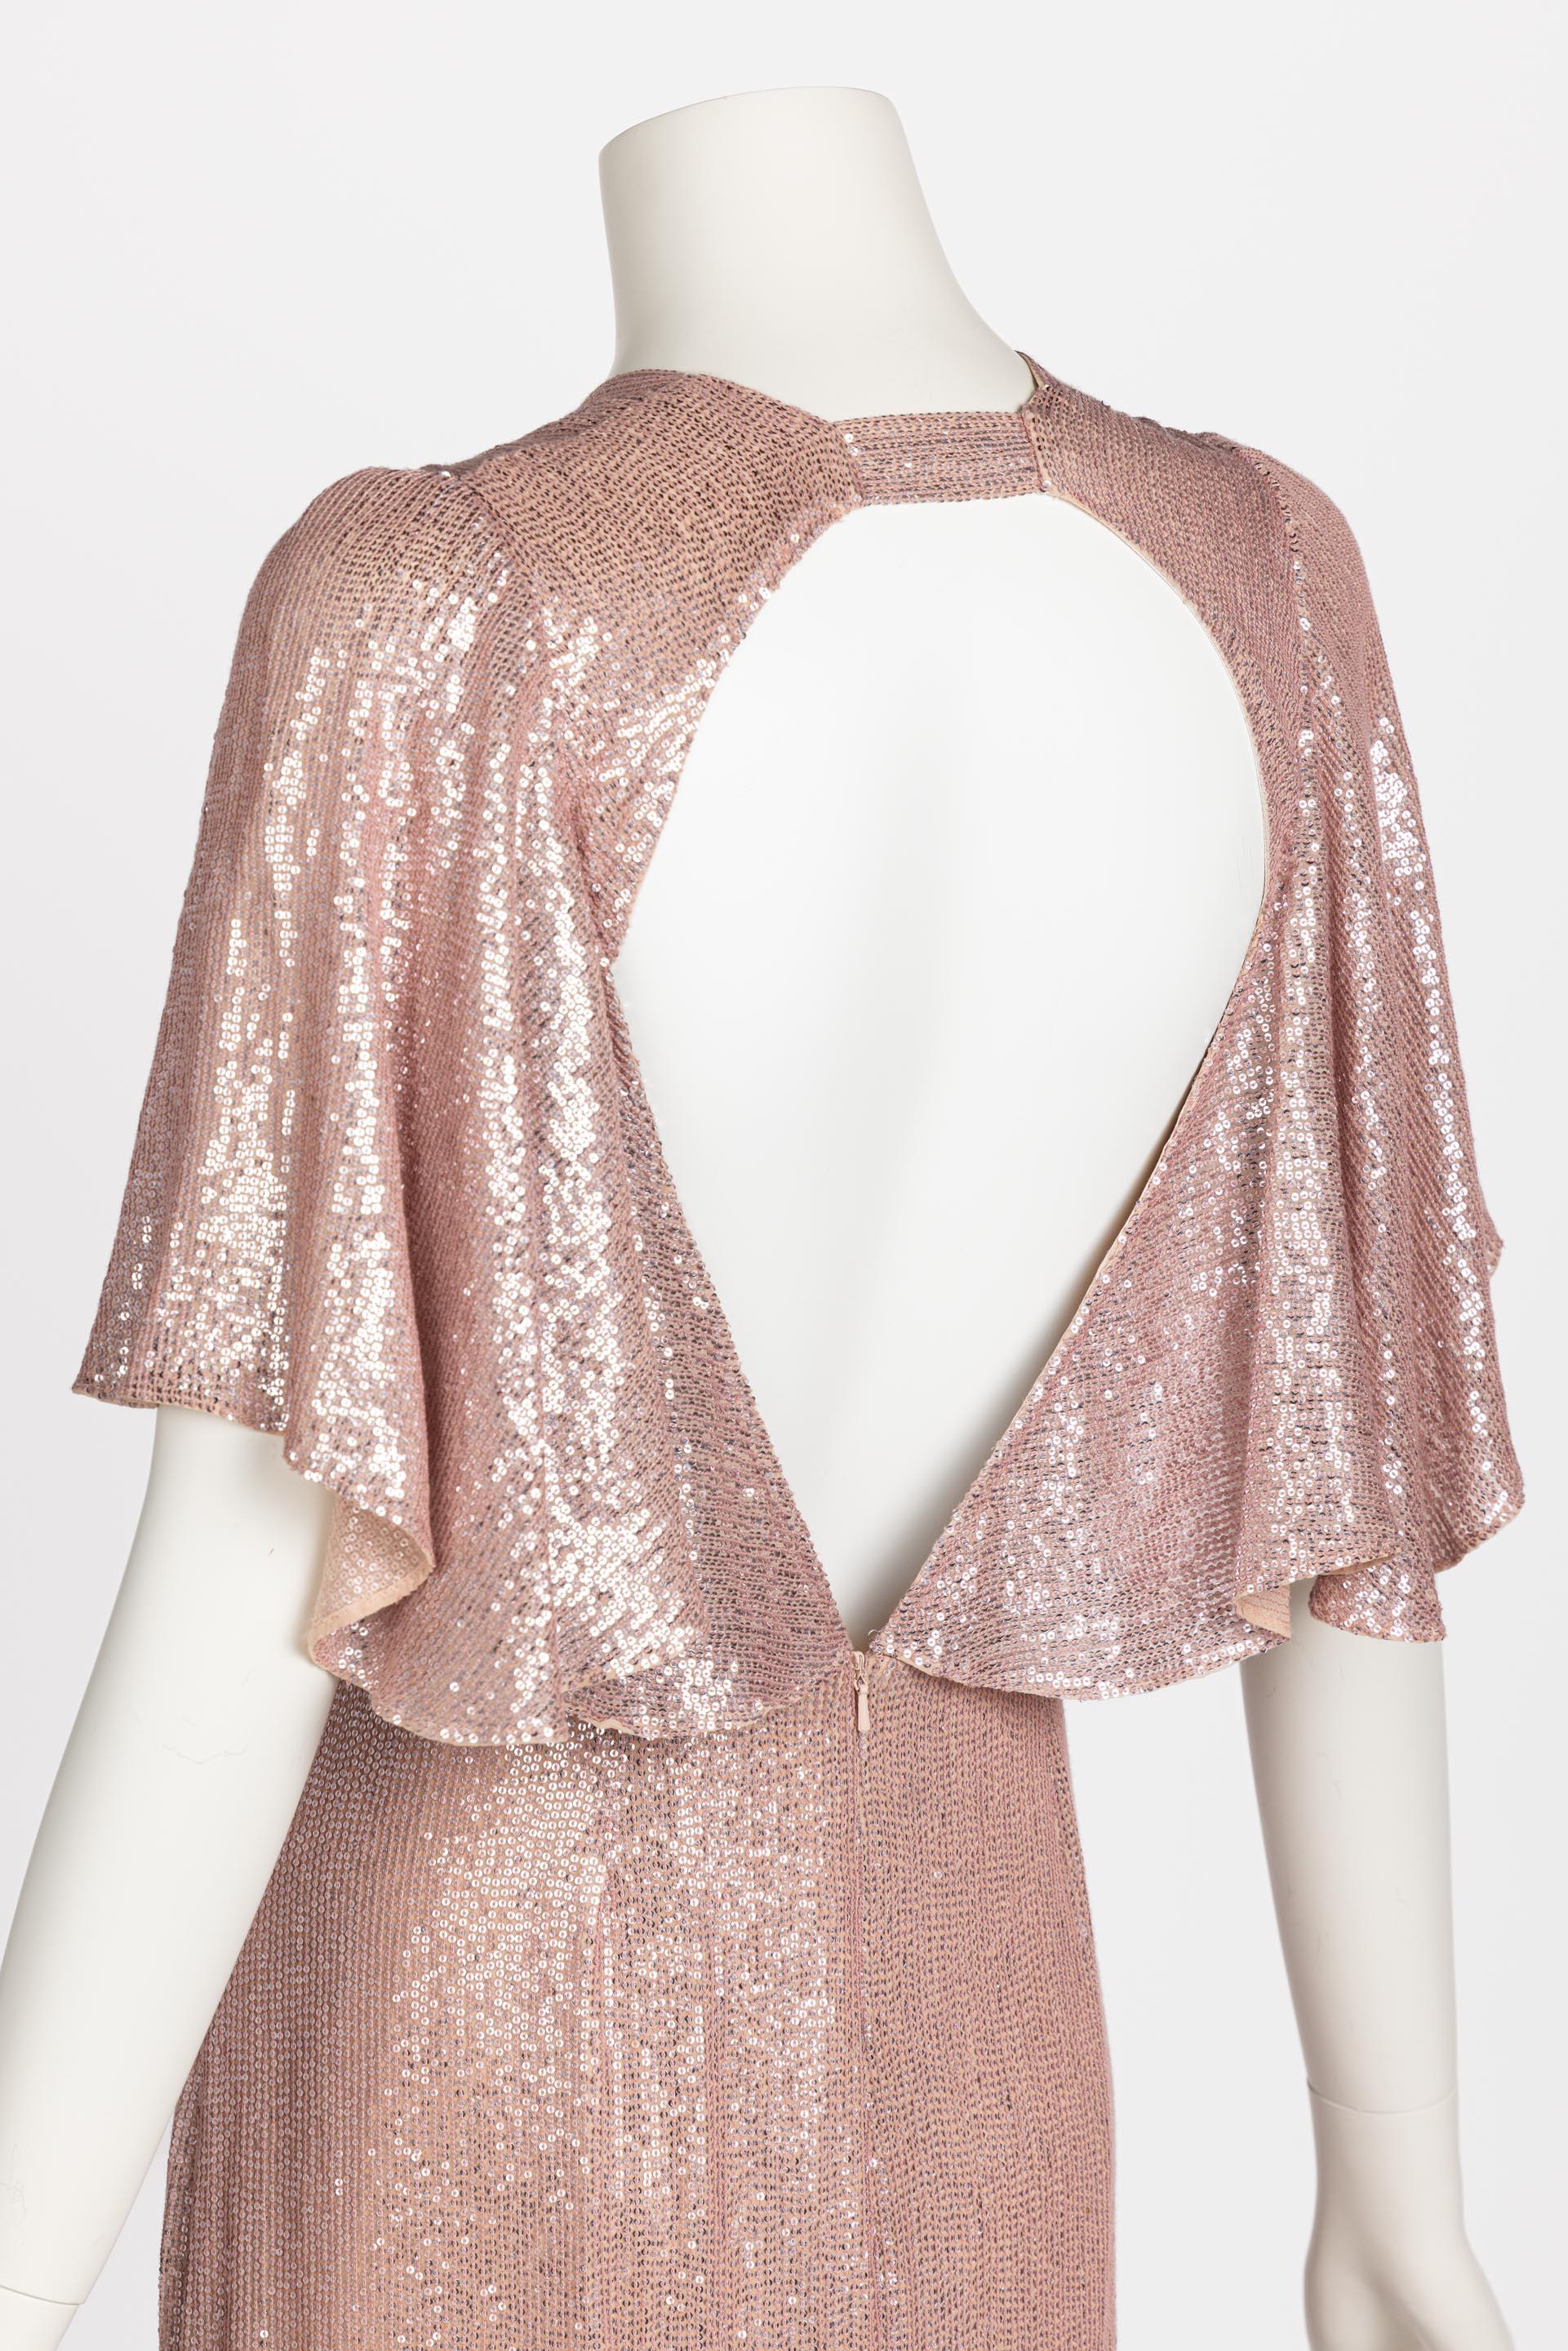 Temperley London Pastel Pink Sequin Satin Cut Out Back Gown , Resort 2017 1